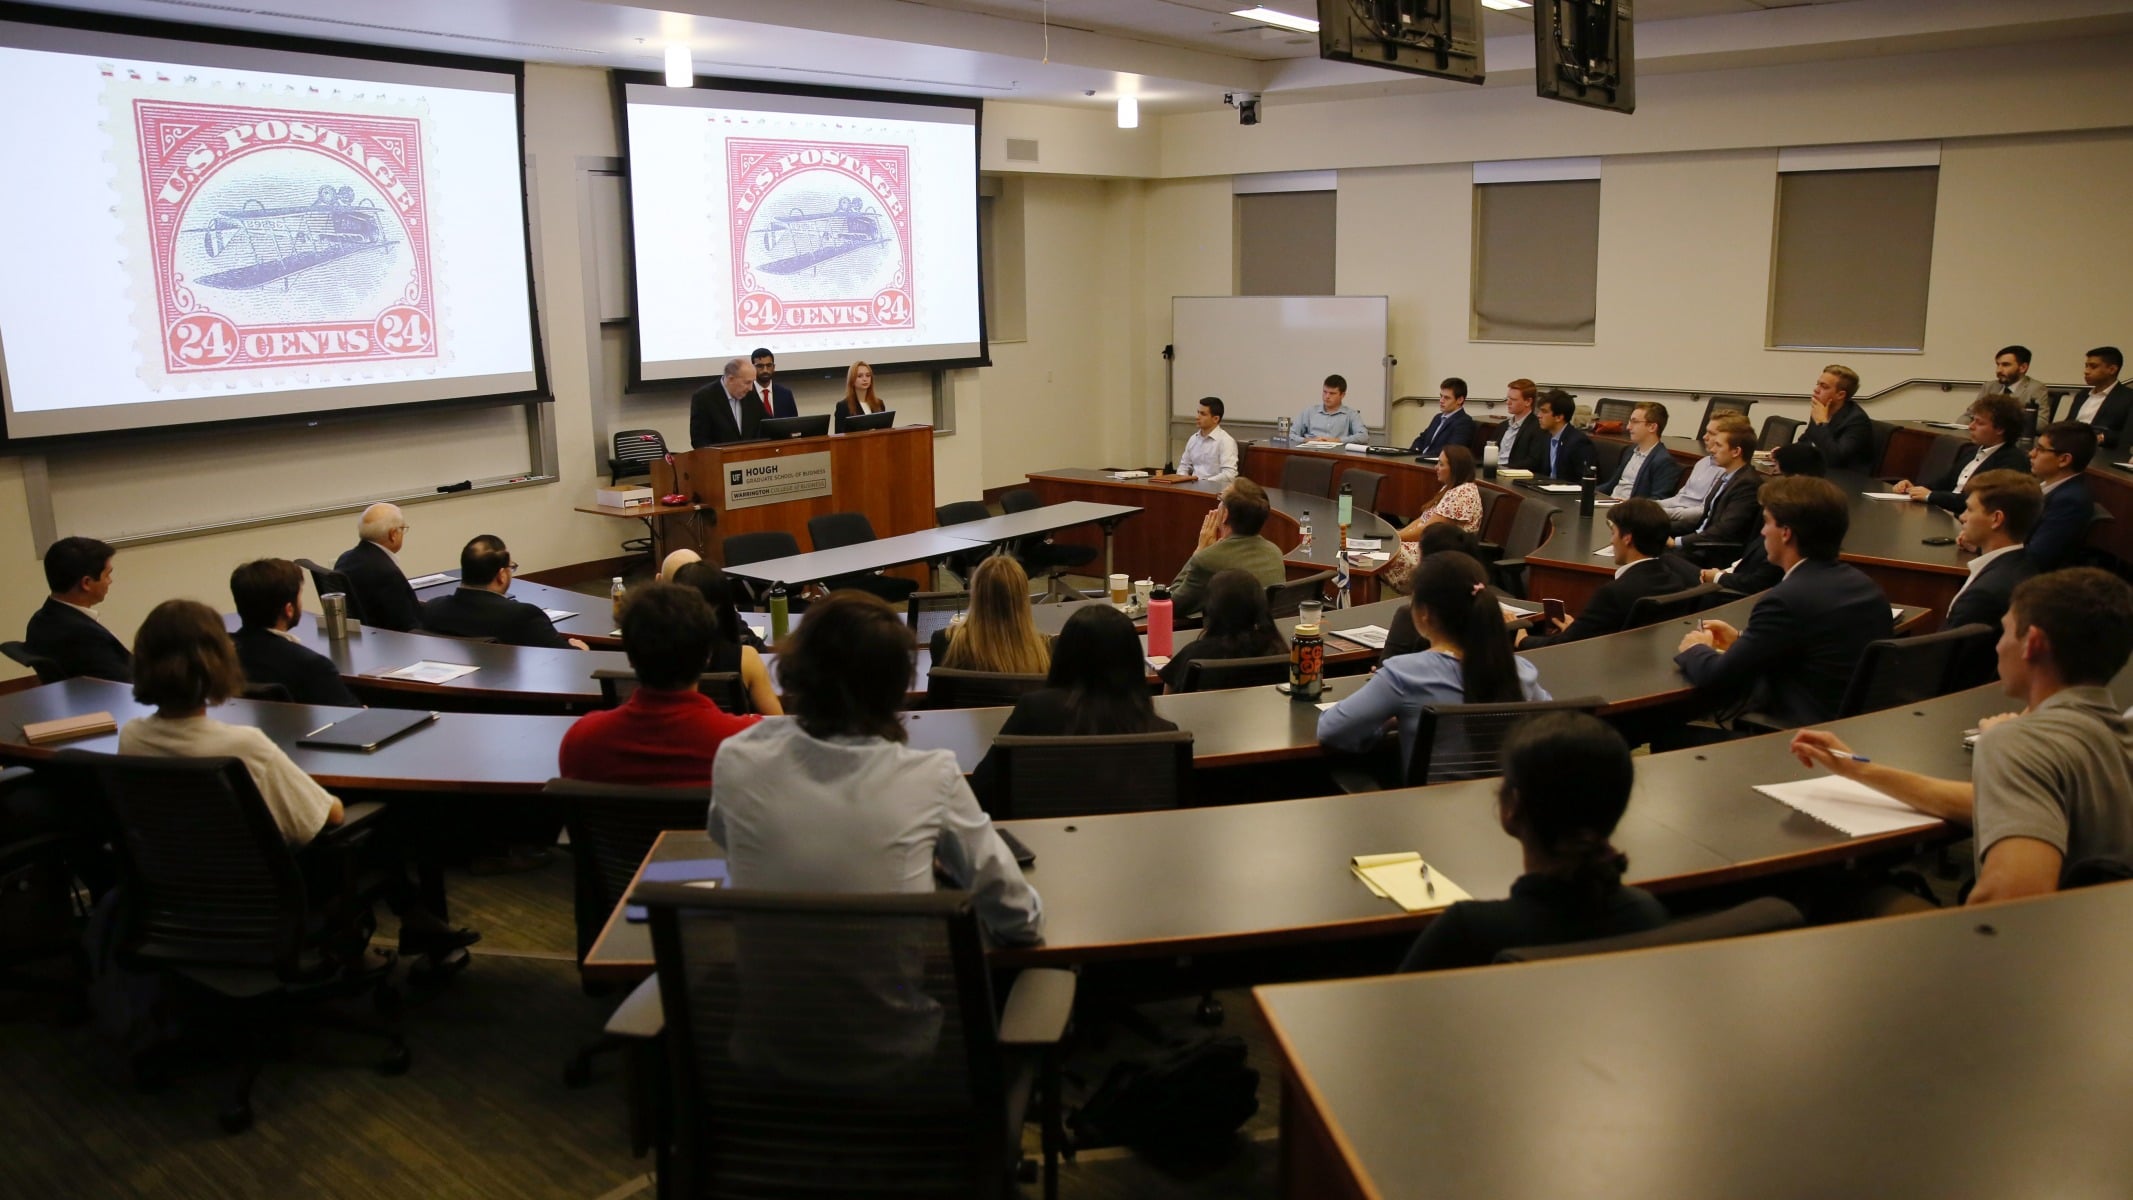 Students attend a panel discussion titled Foundations of Free Enterprise: Capitalism and Capital Markets